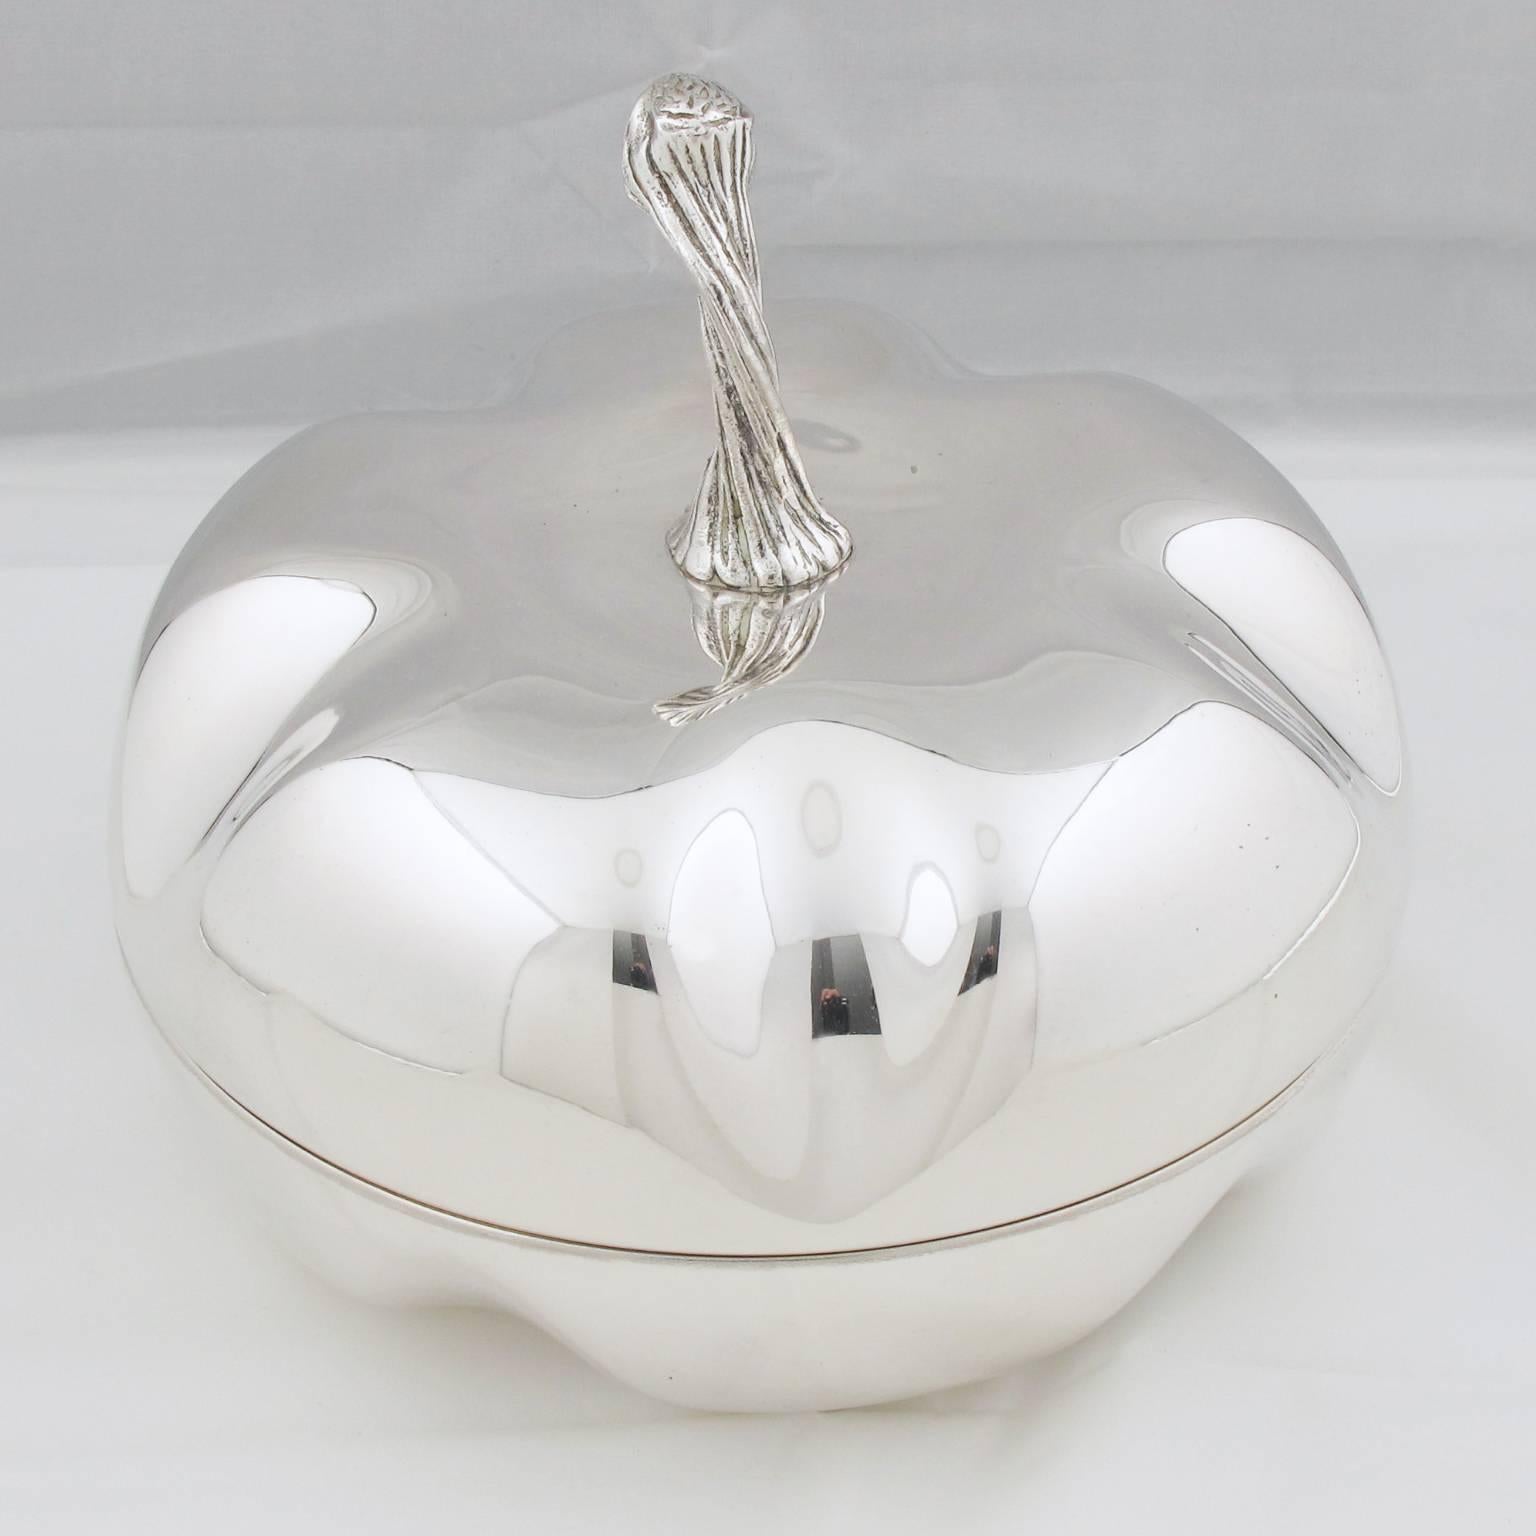 Elegant huge pumpkin shaped decorative box designed by Christian Dior for his Home Collection. This lovely large decorative lidded box is made of silver plated metal with nicely shaped design. Marked underside Christian Dior with silversmith